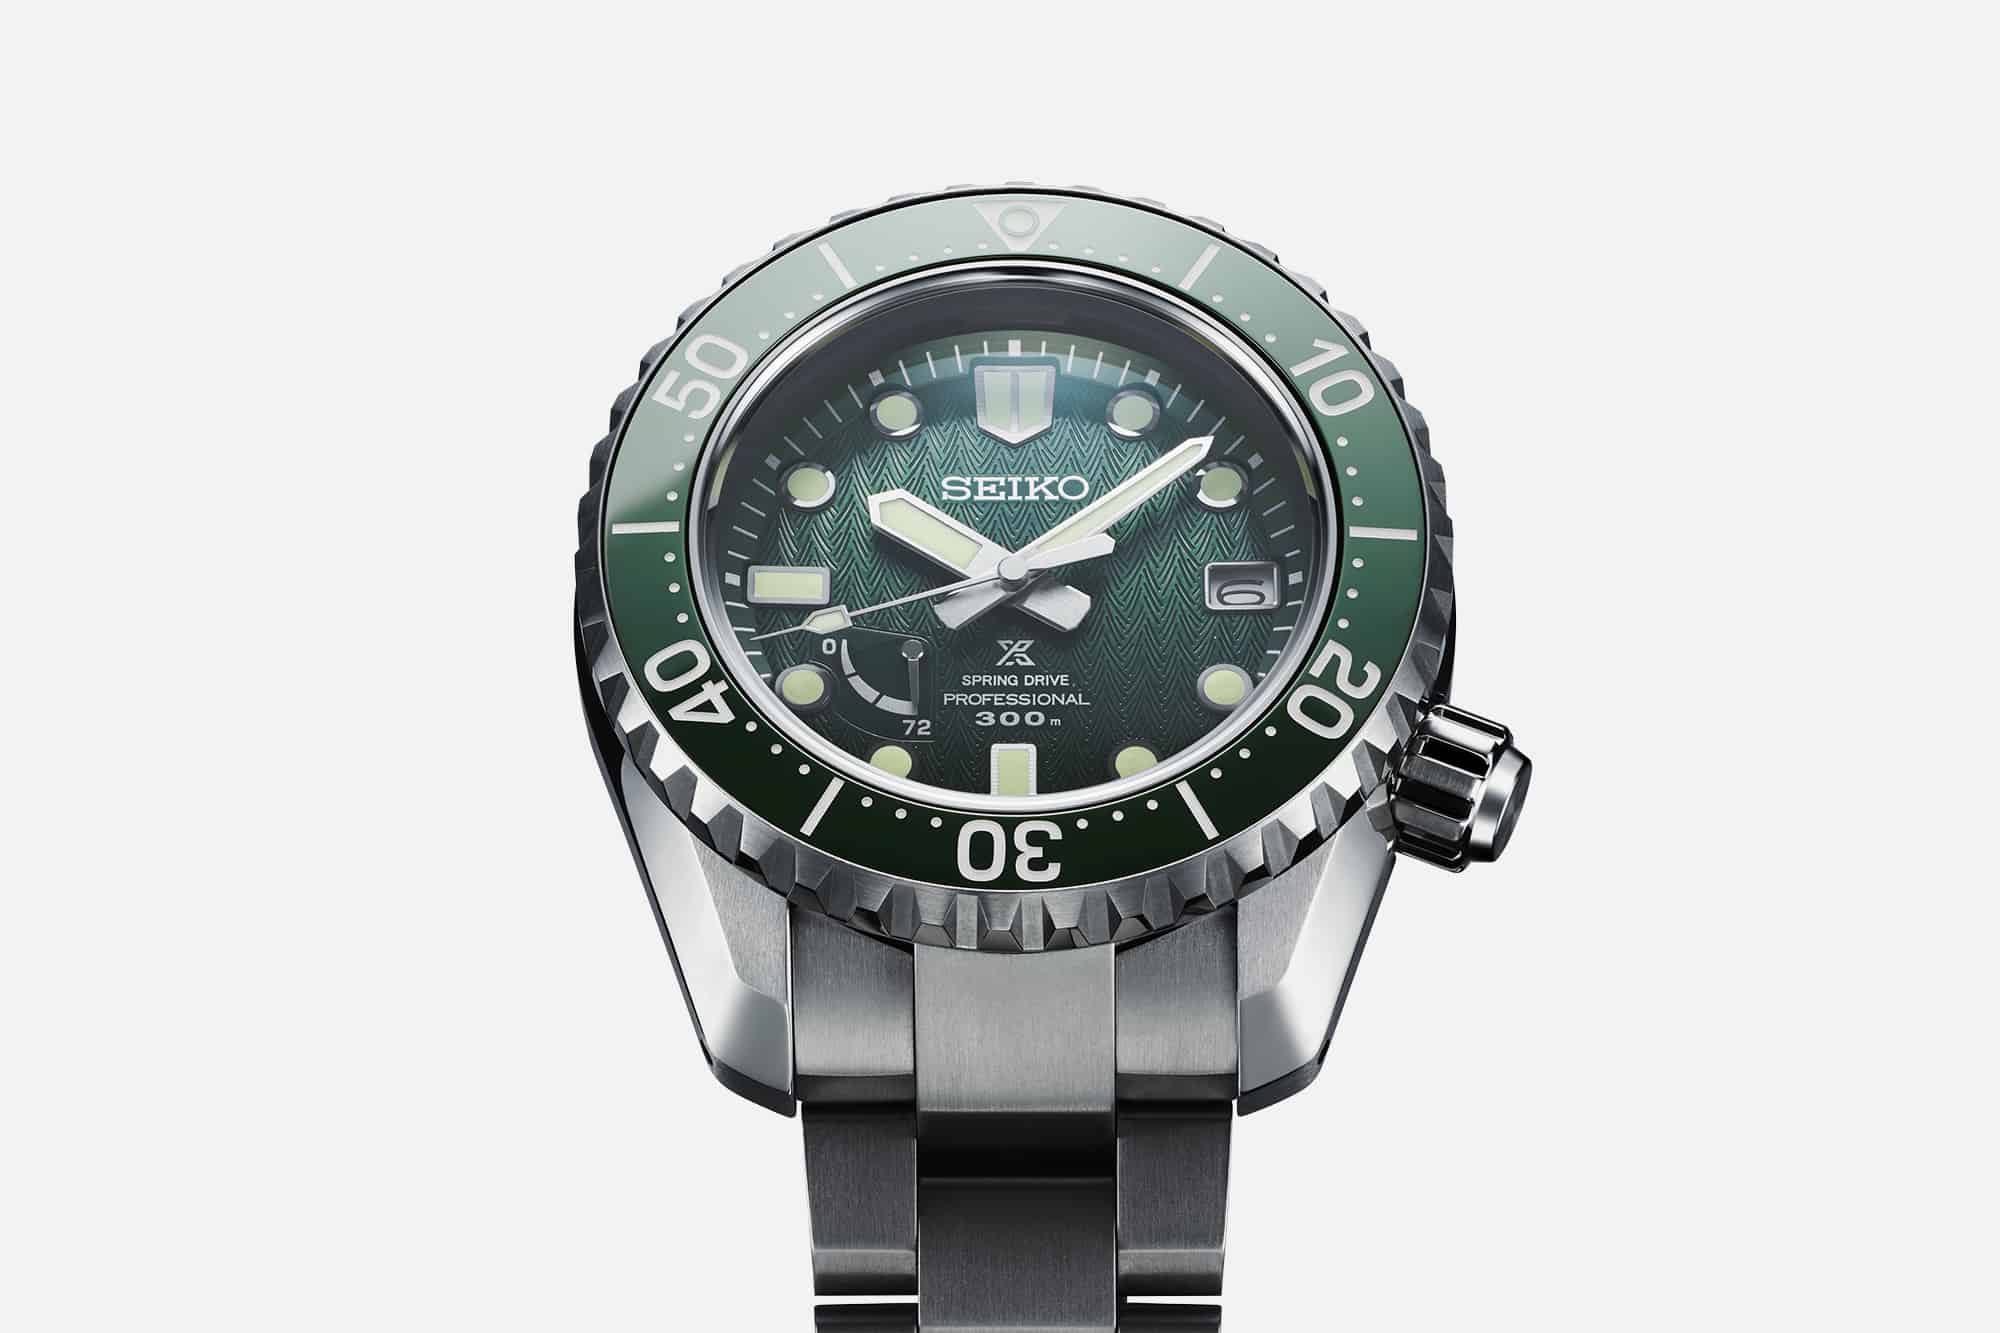 Seiko’s Latest Prospex LX Limited Edition is Very Big and Very Green